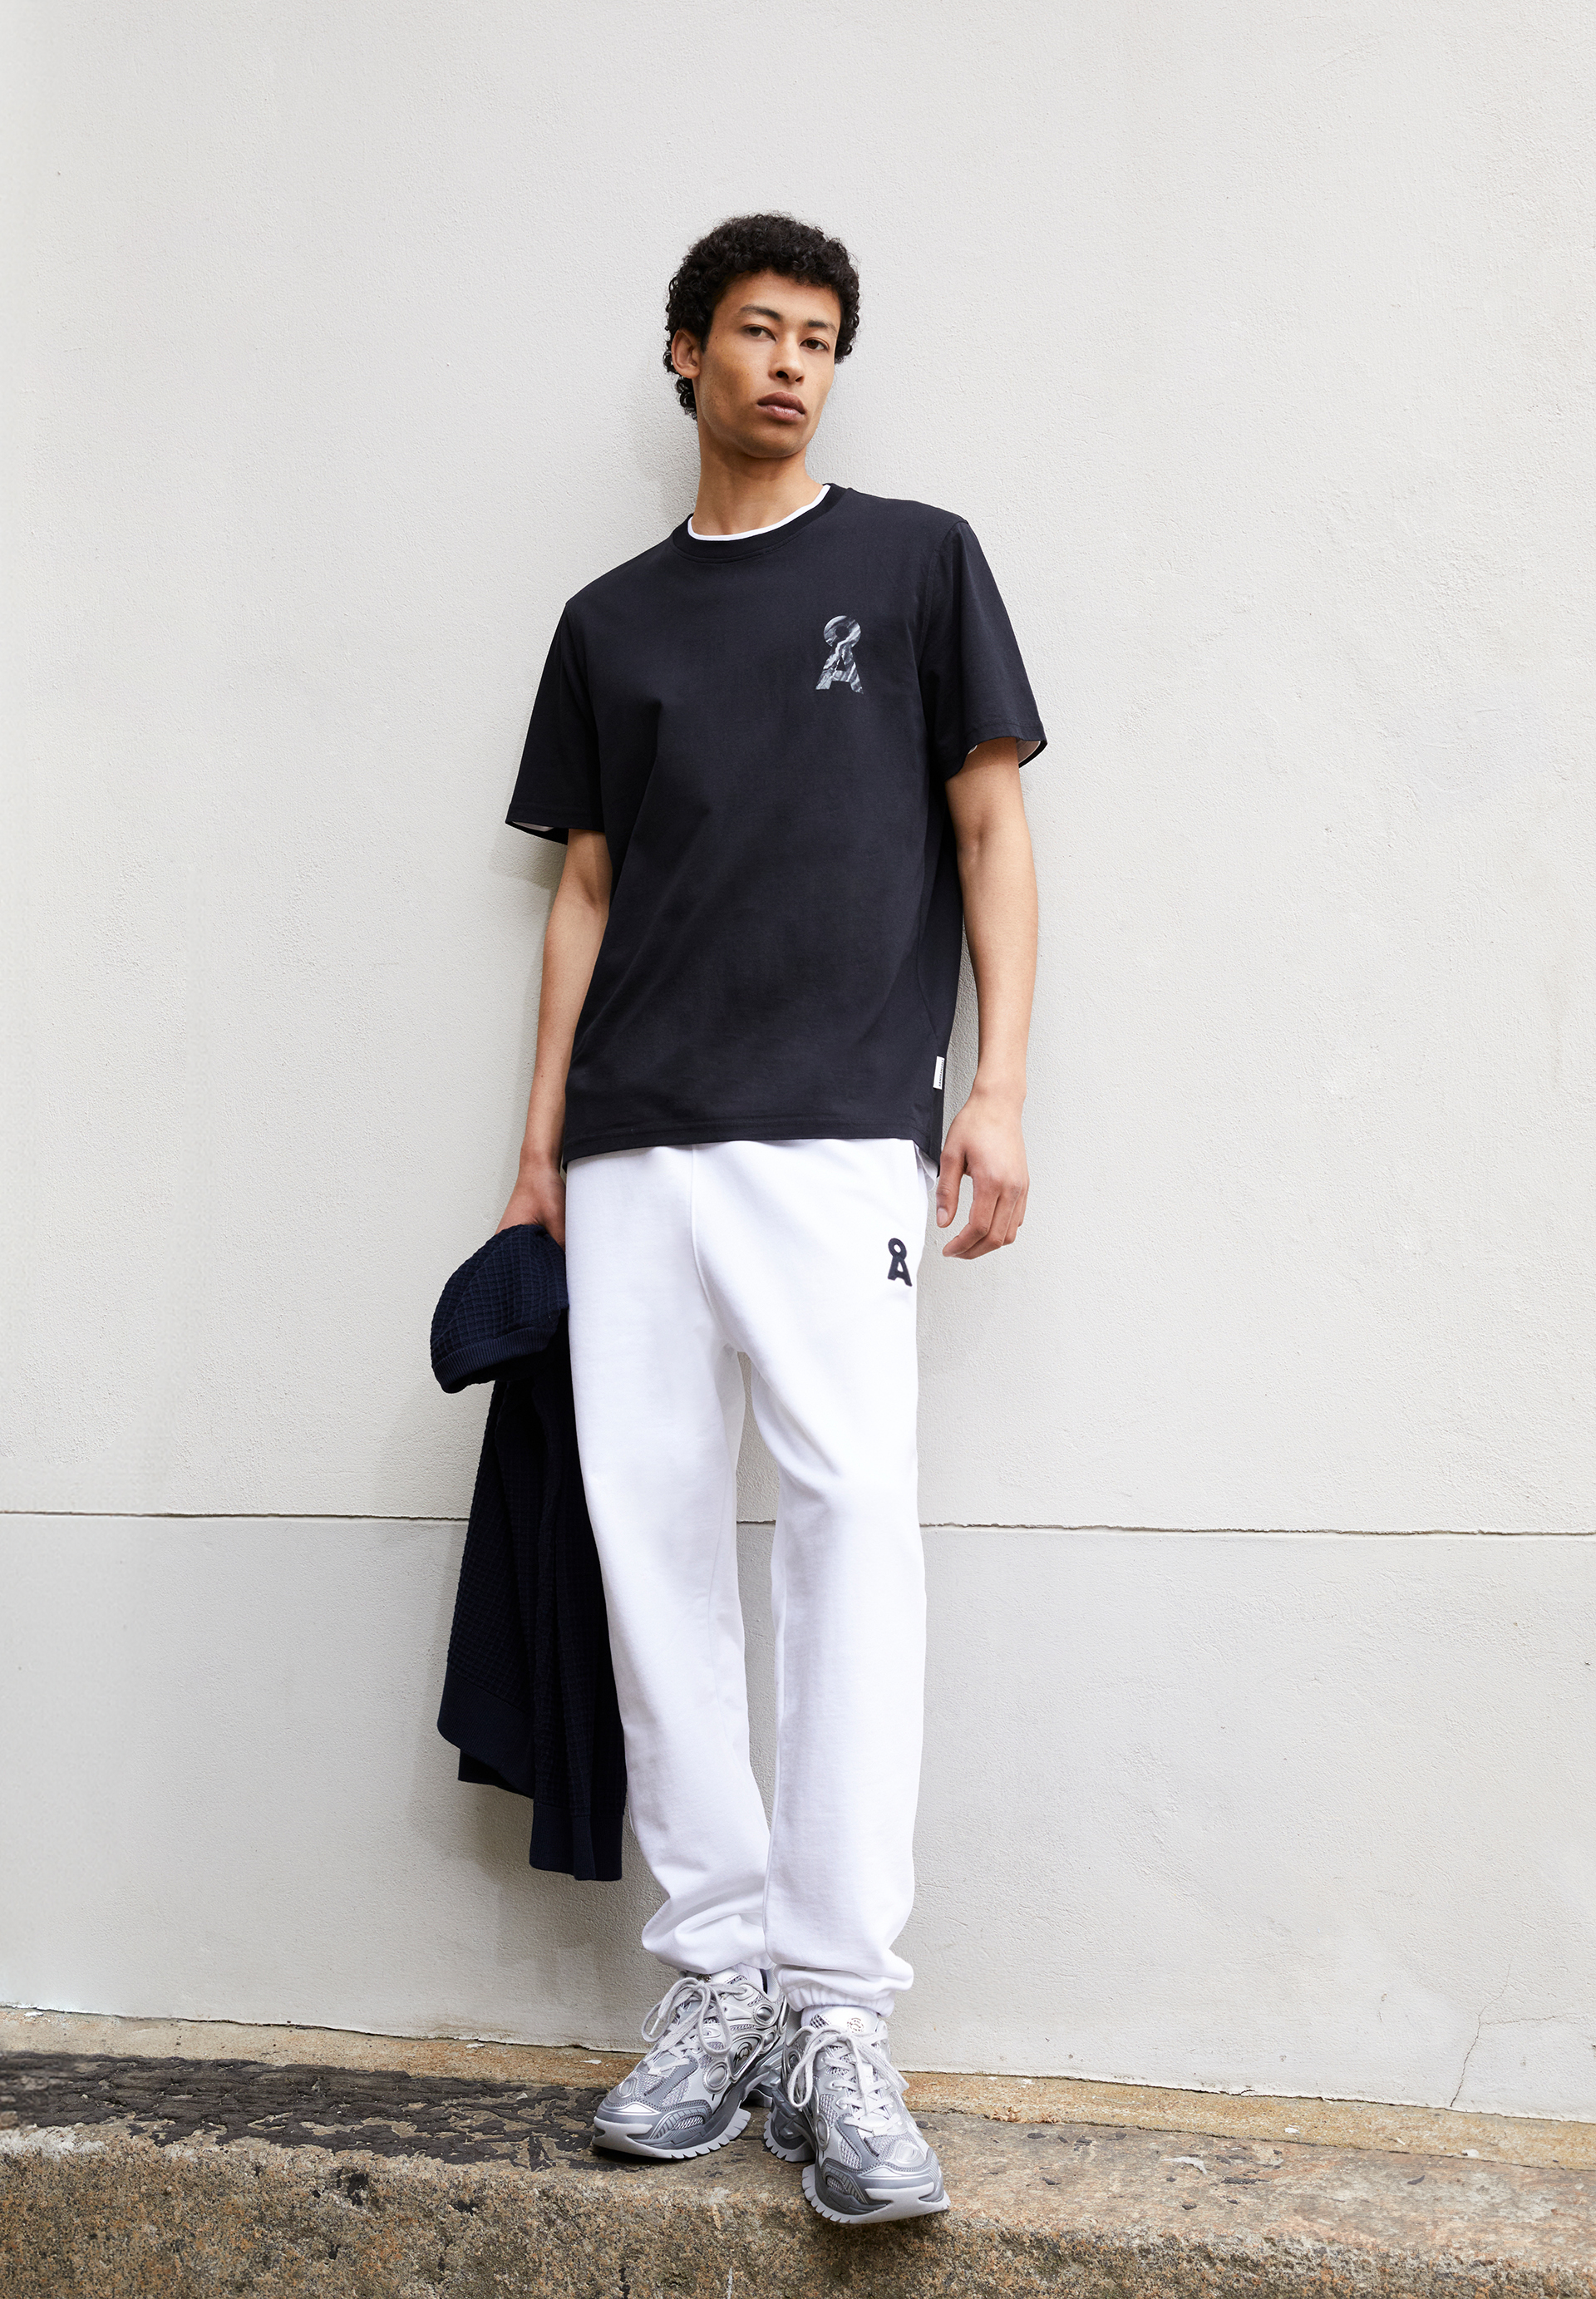 AADONI A ROCK T-Shirt Relaxed Fit made of Organic Cotton